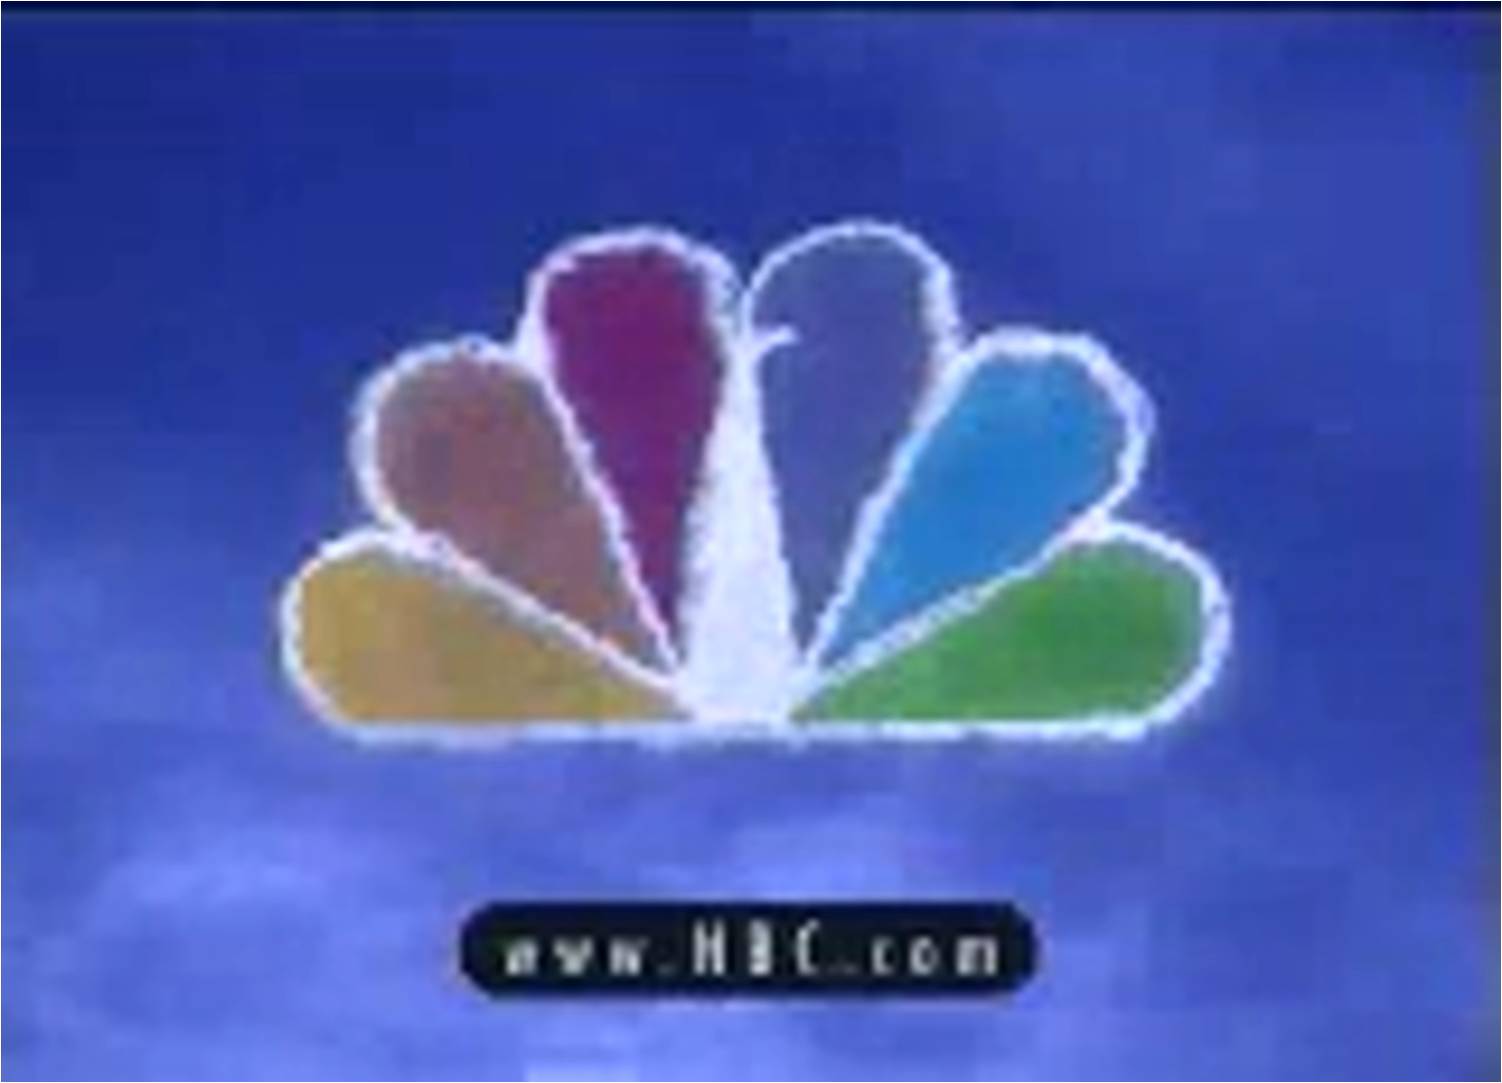 NBC Productions (Peacock in the sky, 1996)